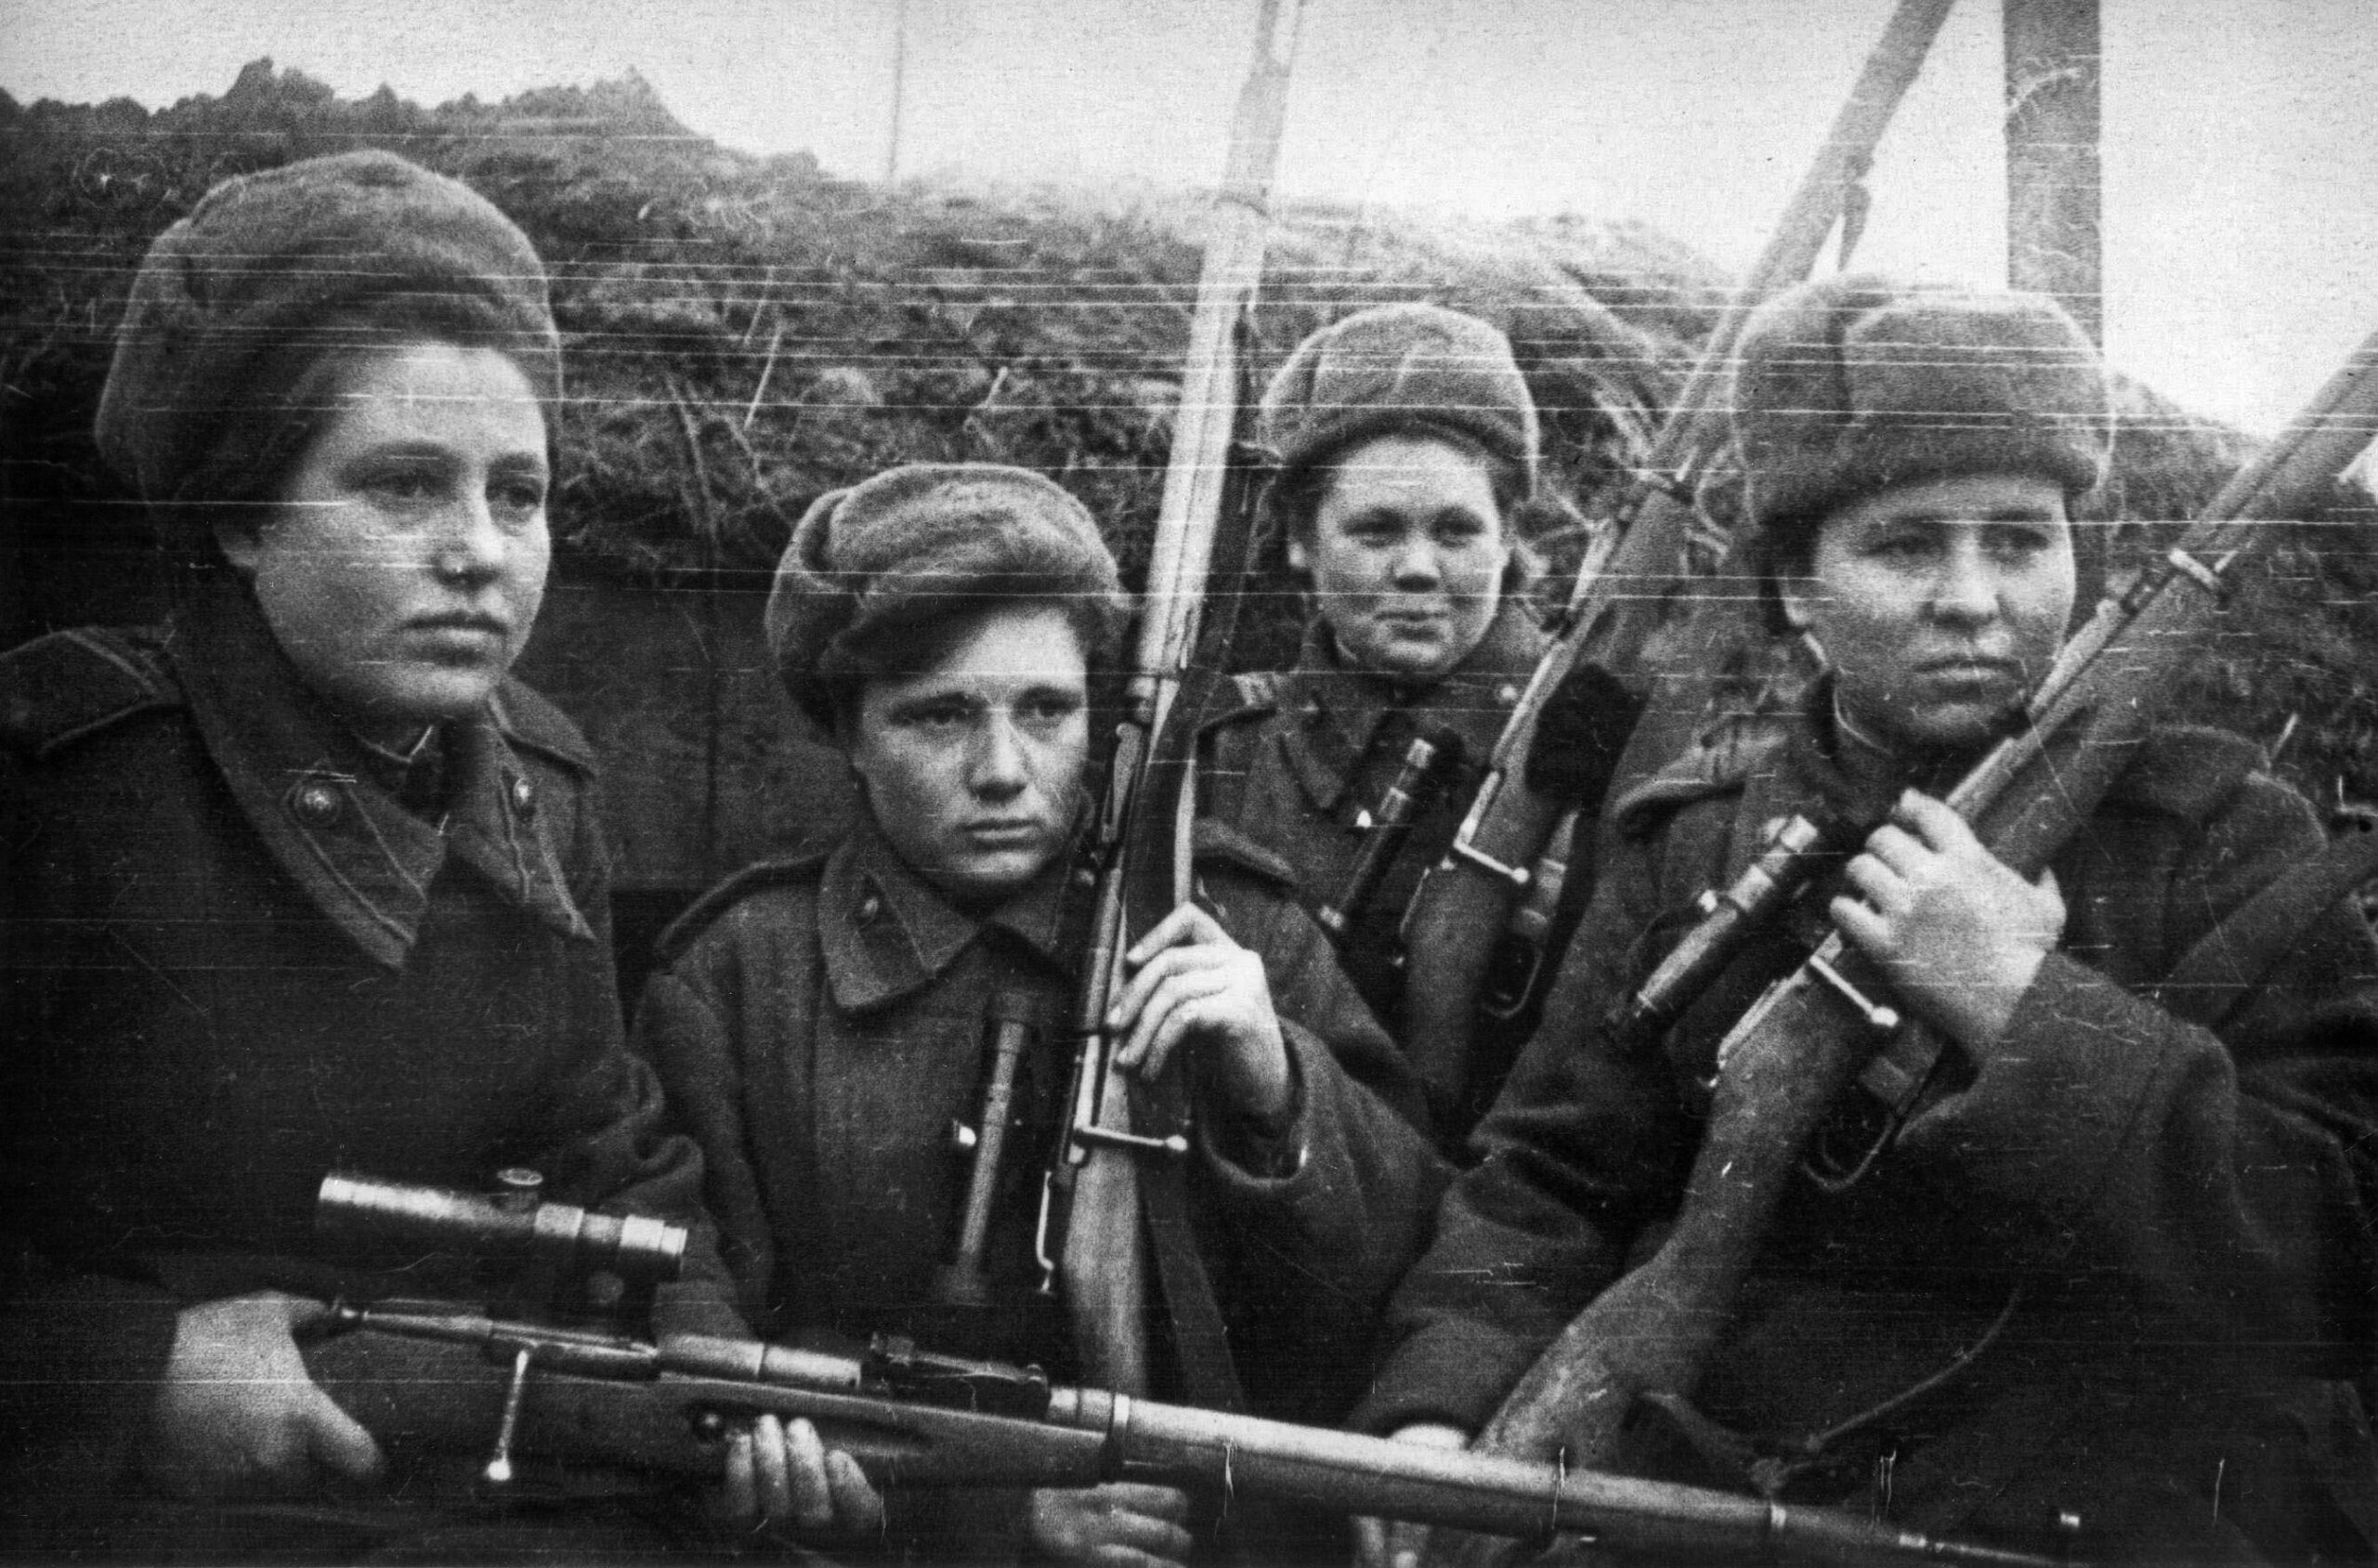 These female Soviet snipers posed for the photographer with grim determination. Allerberger took out a group of female snipers firing at German soldiers from trees.